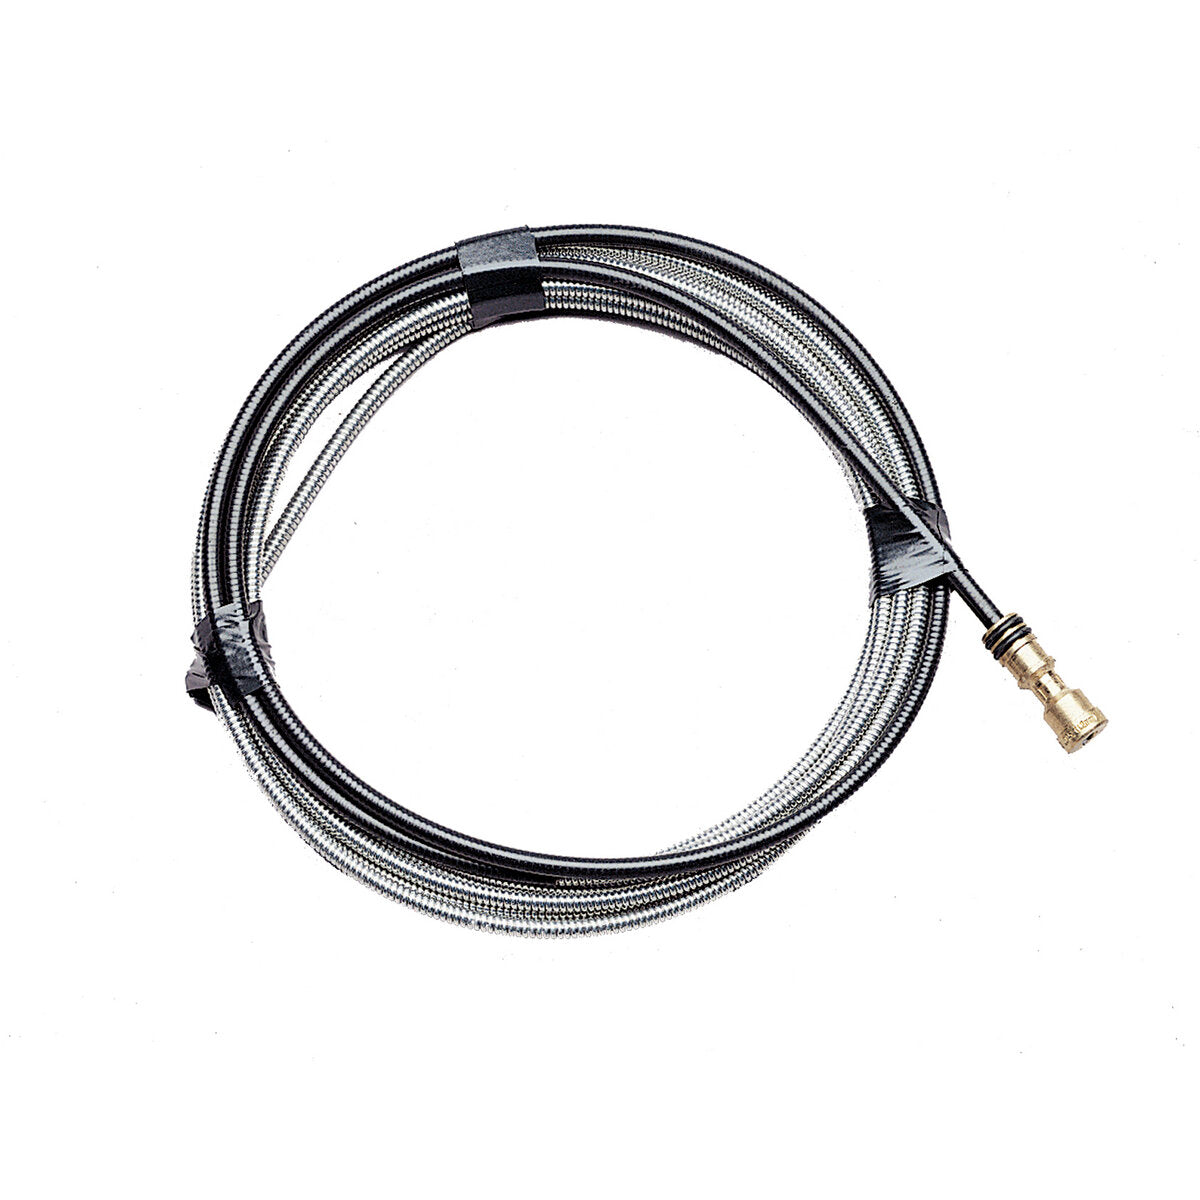 Lincoln Electric - Cable Liner .052-1/16 in (1.3-1.6 mm) 15 ft (4.6 m) - KP45-116-15